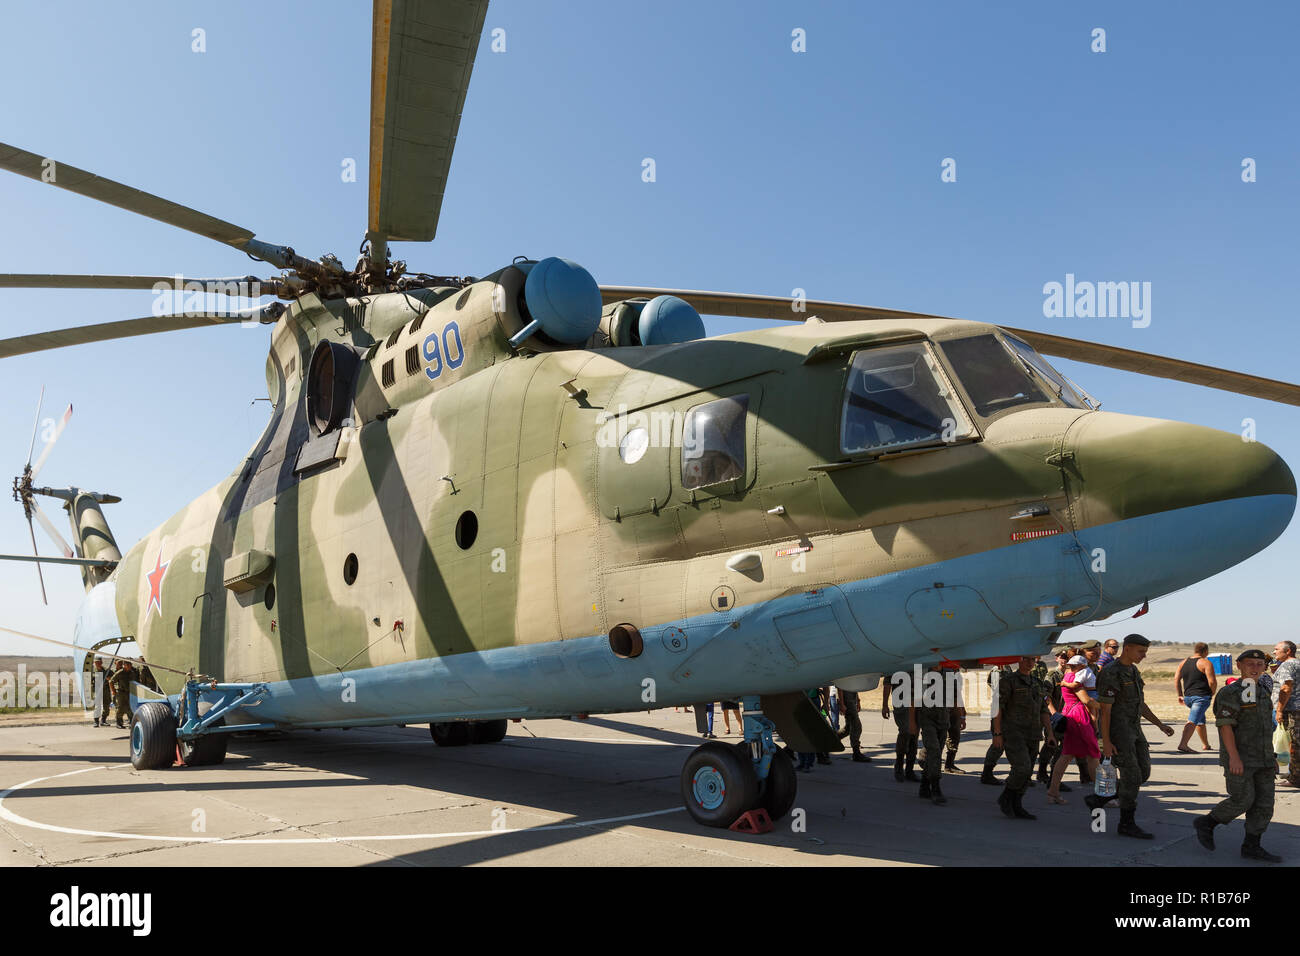 KADAMOVSKIY TRAINING GROUND, ROSTOV REGION, RUSSIA, 26 AUGUST 2018:  Transport universal military helicopter MI-26 and visitors of the exhibition Stock Photo